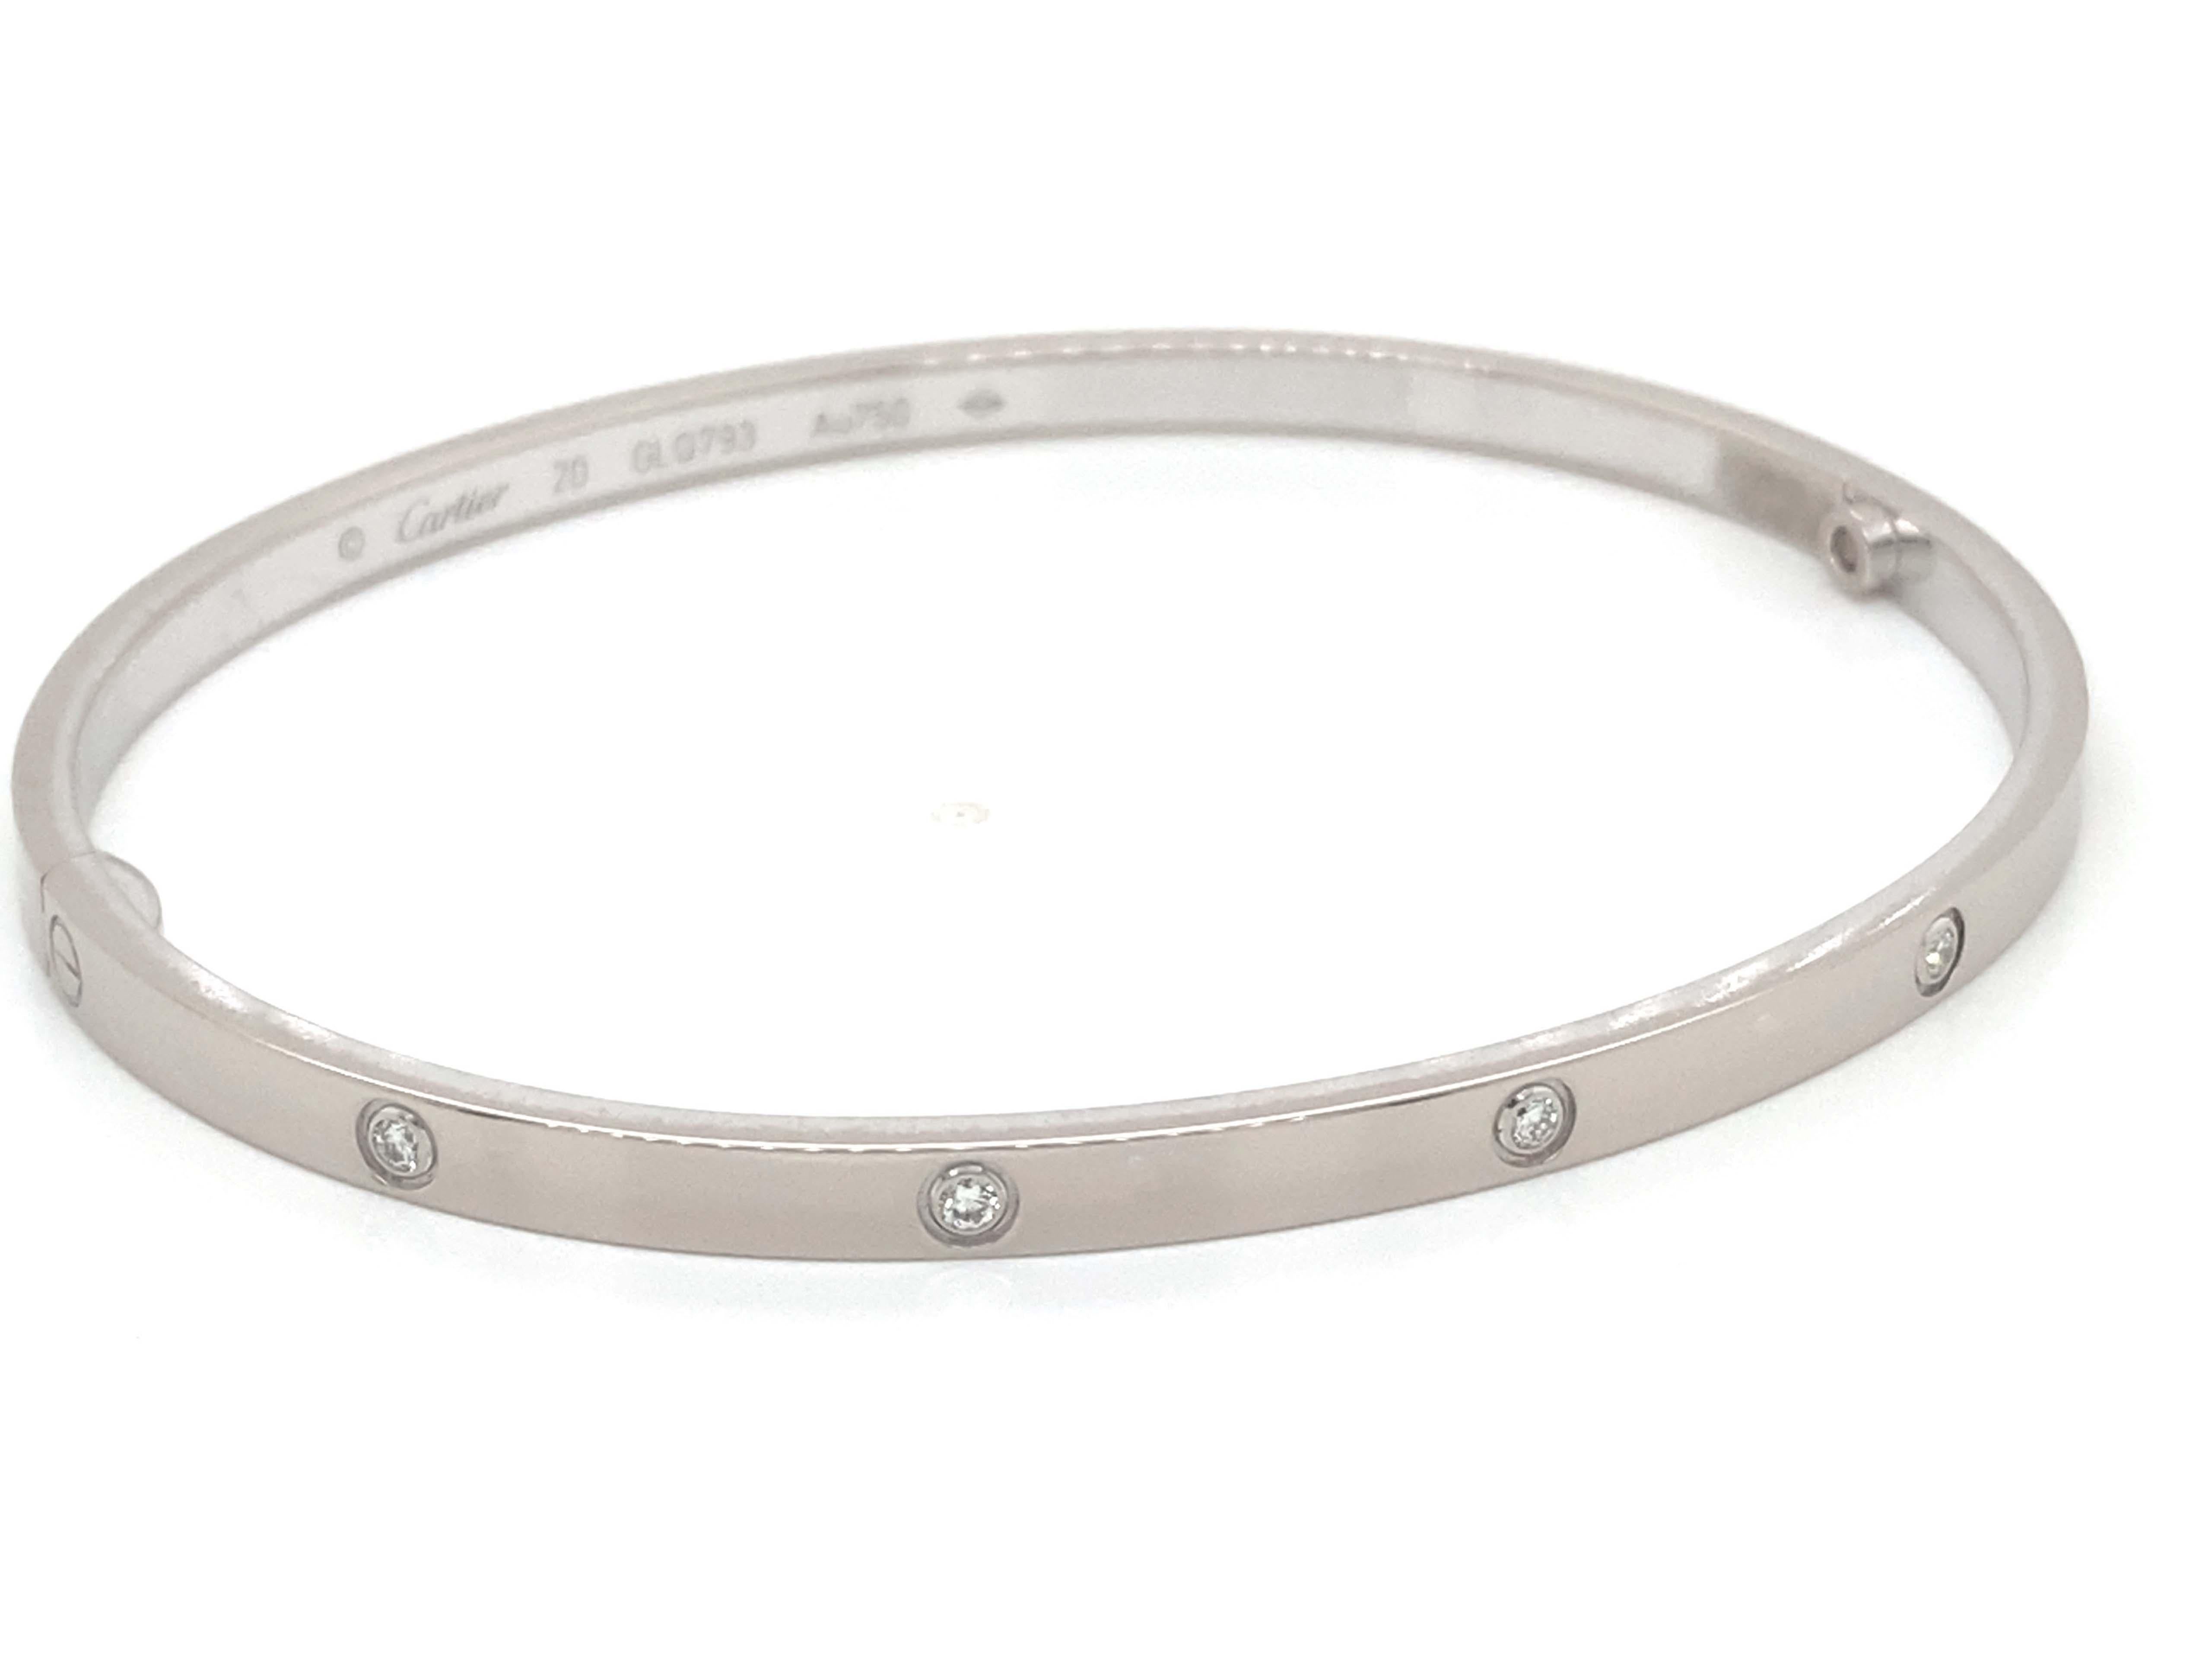 Cartier Diamond Love Bracelet 18K White Gold Size 20 In Excellent Condition For Sale In Honolulu, HI